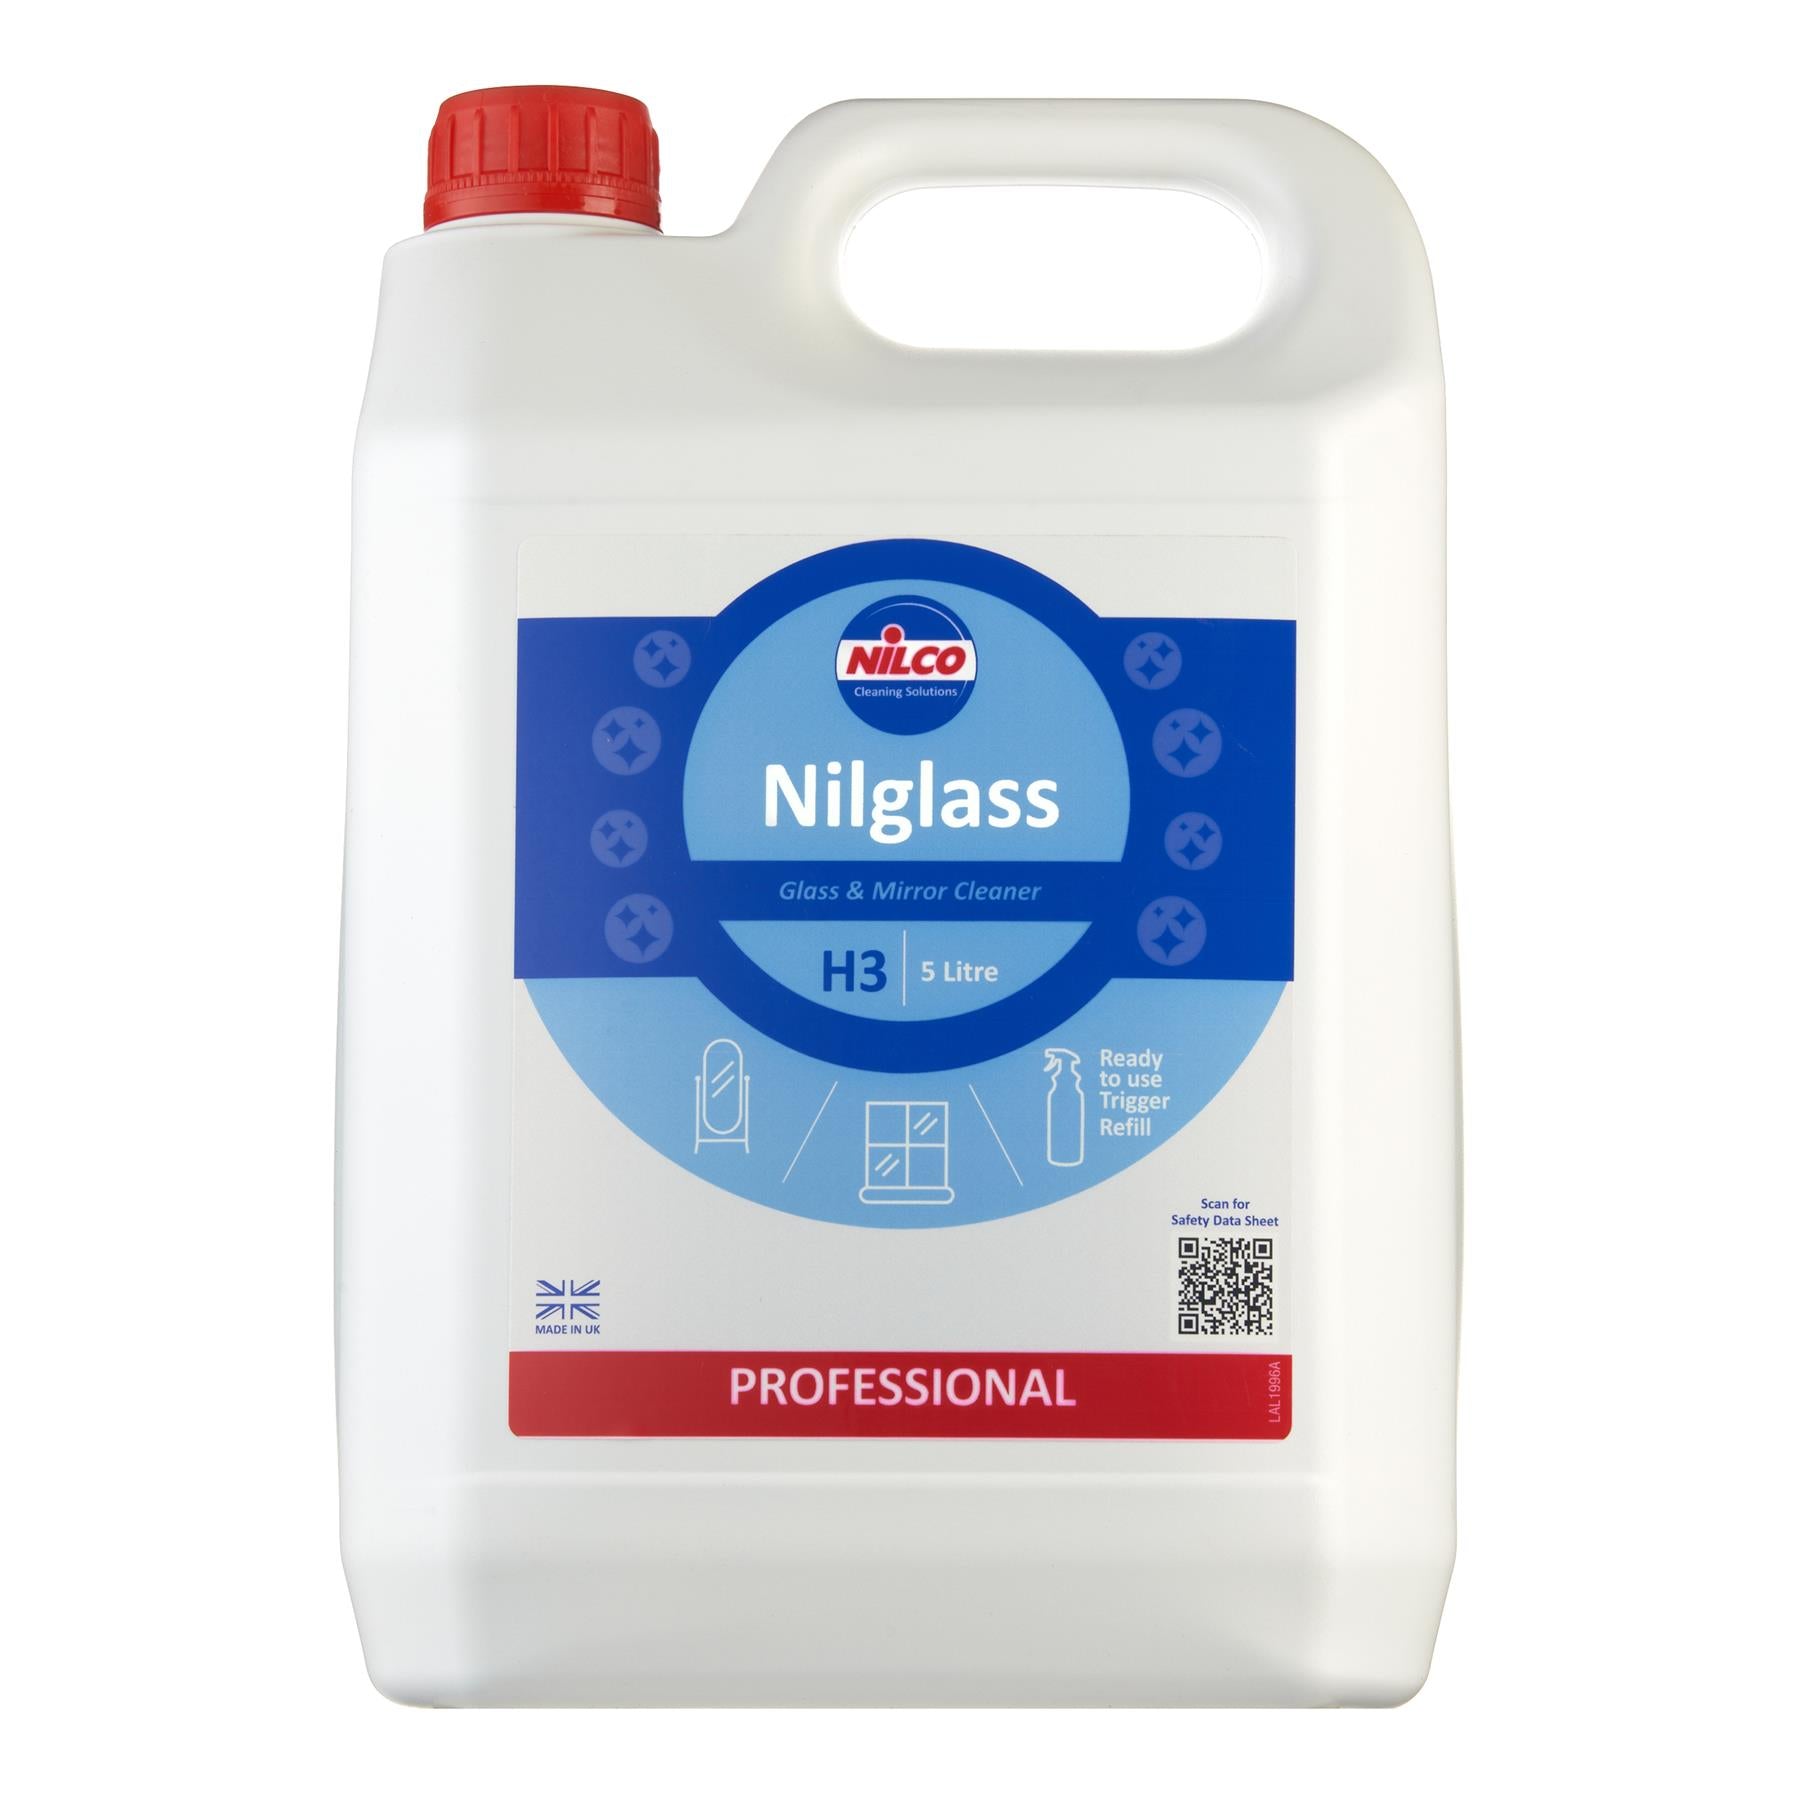 Nilglass Glass and Mirror Cleaner 5 Litres - Nilco UK